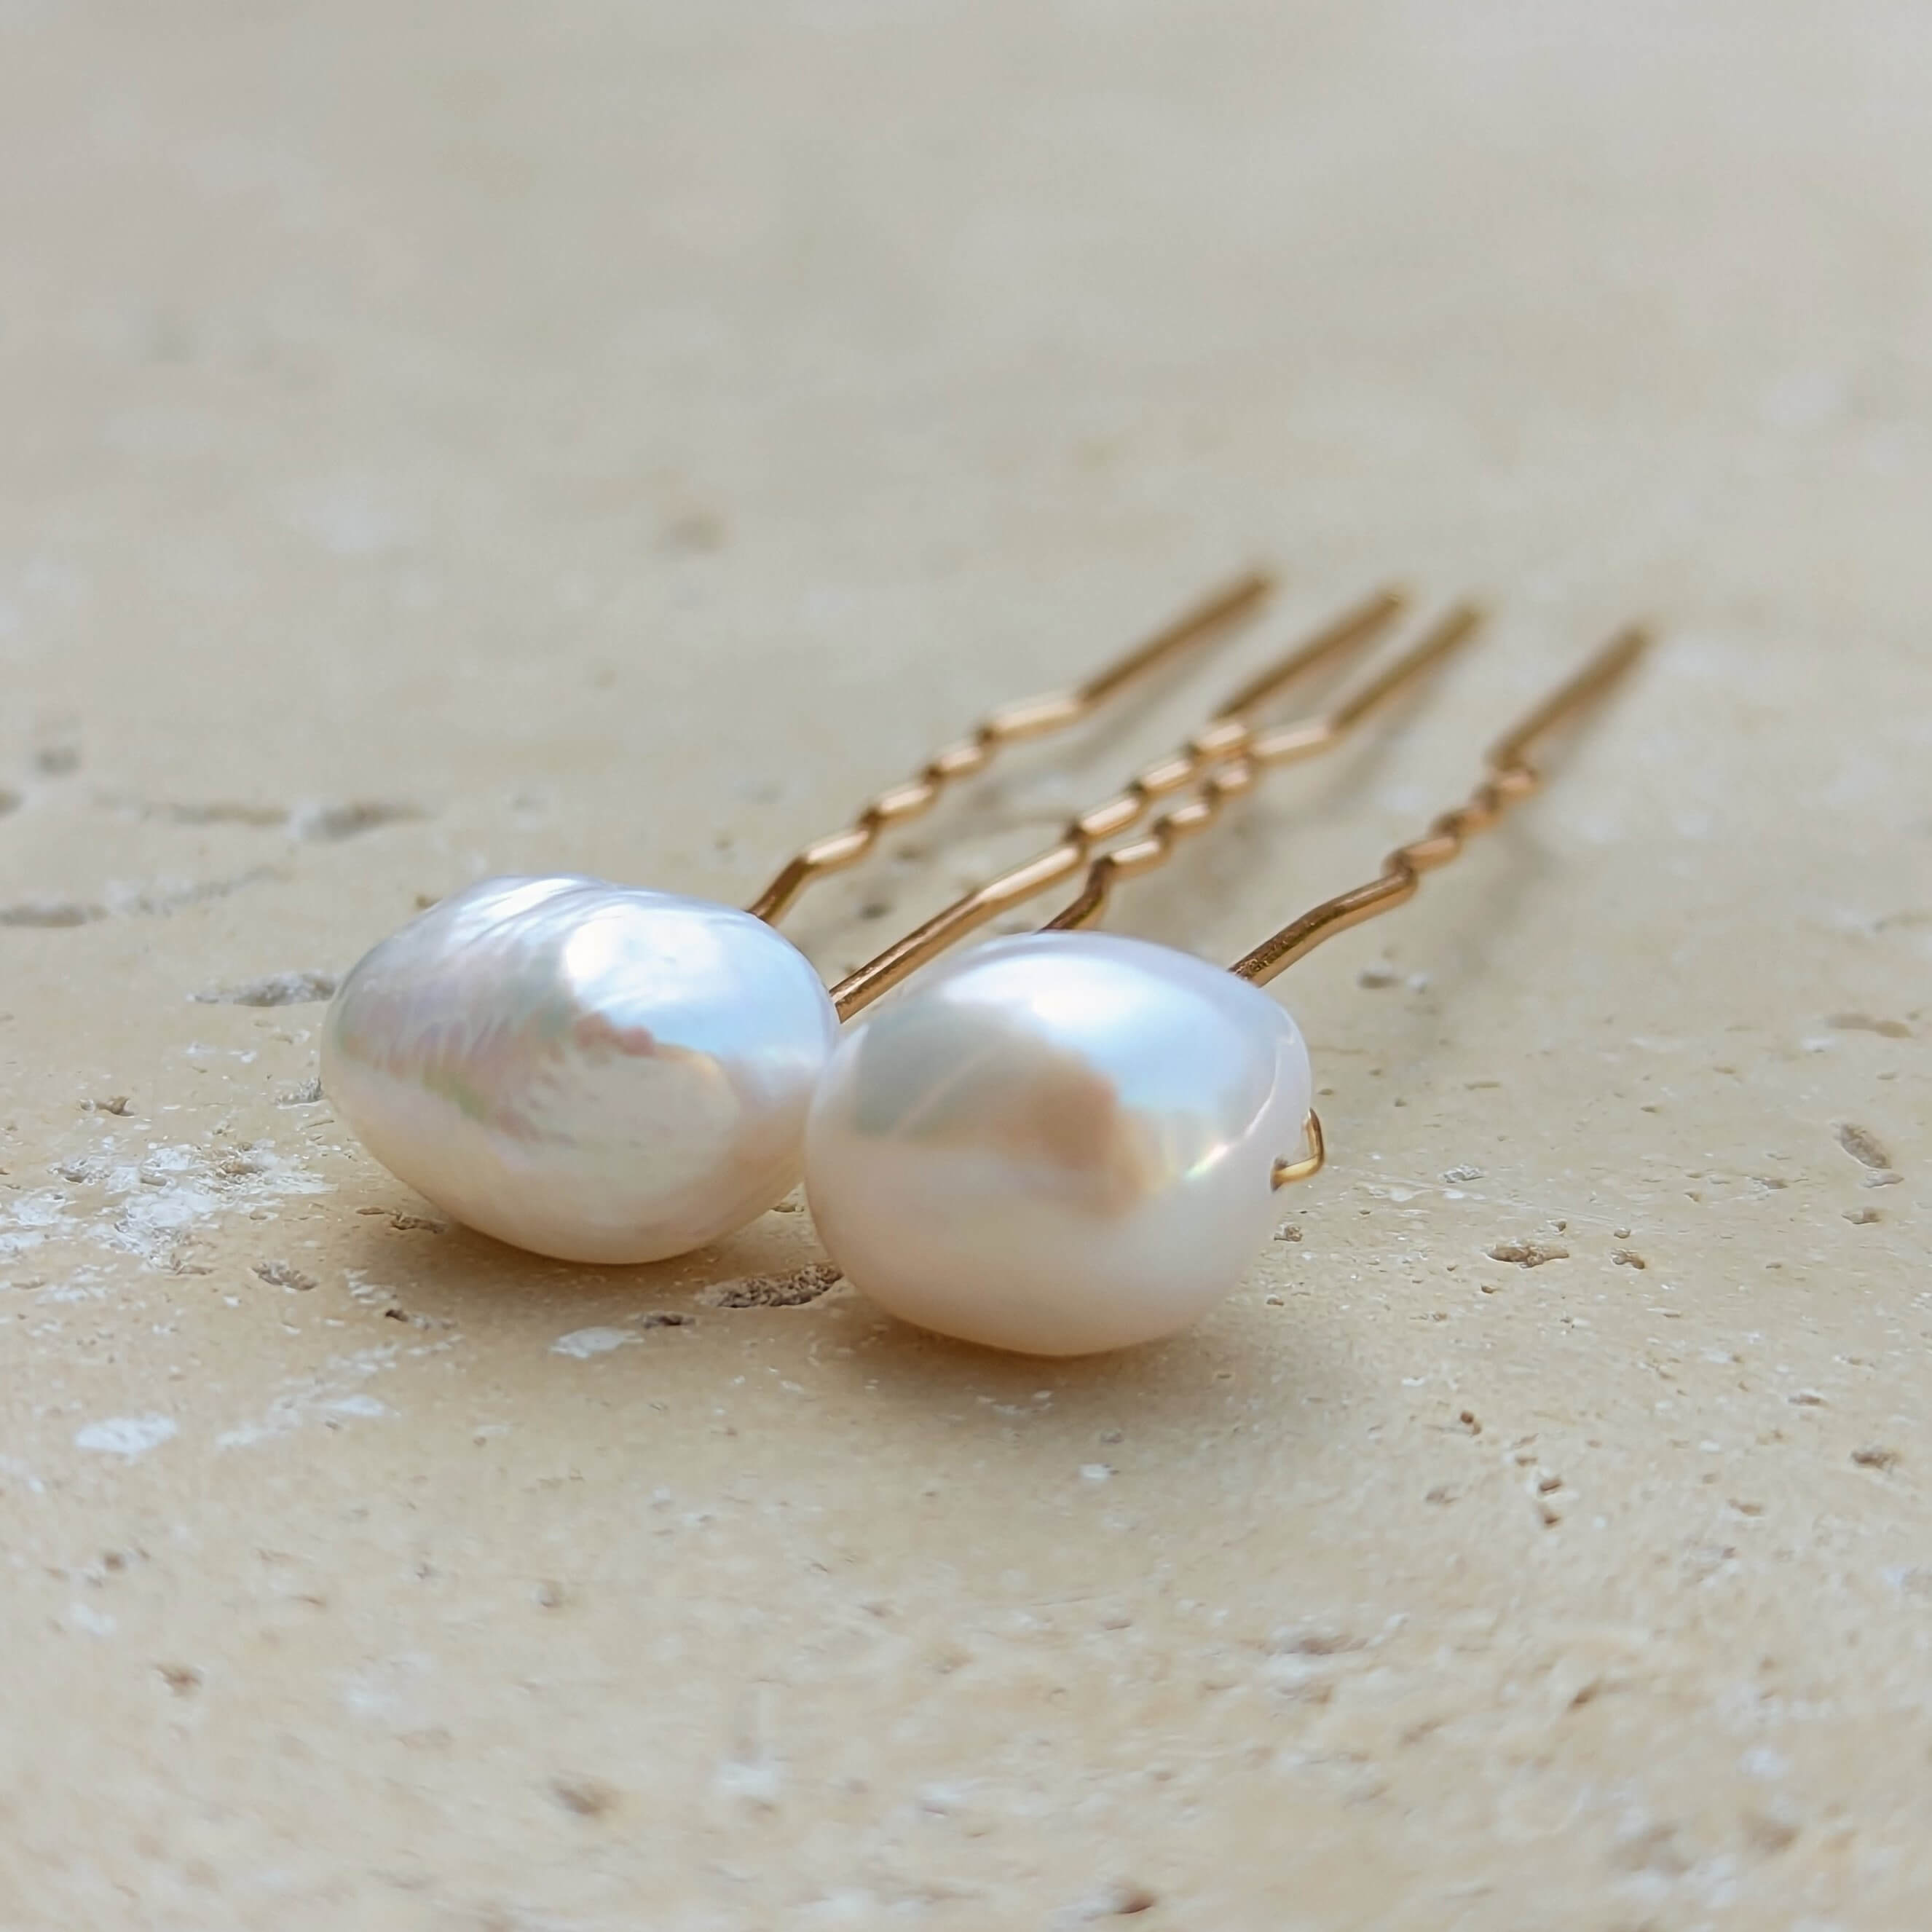 Two large baroque pearl hair pins with gold coloured metal